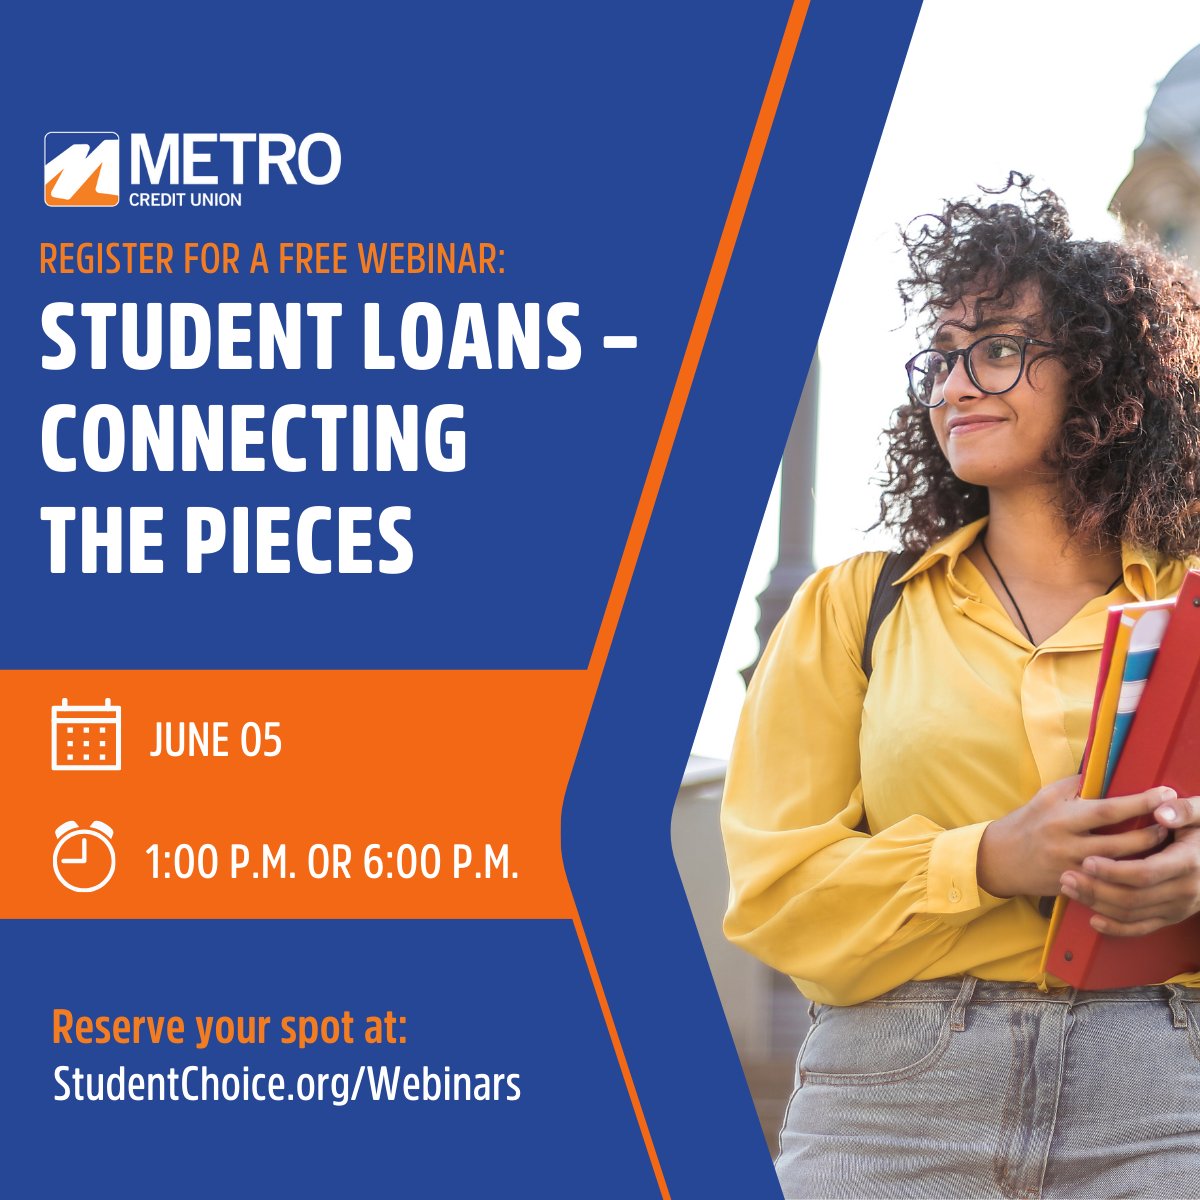 Join us to learn about the #financialaid process & how to make smart decisions to fund your #education. Learn about federal & private #studentloans, the application timeline, and more. Save your spot: ow.ly/C9Hh50RyCpU